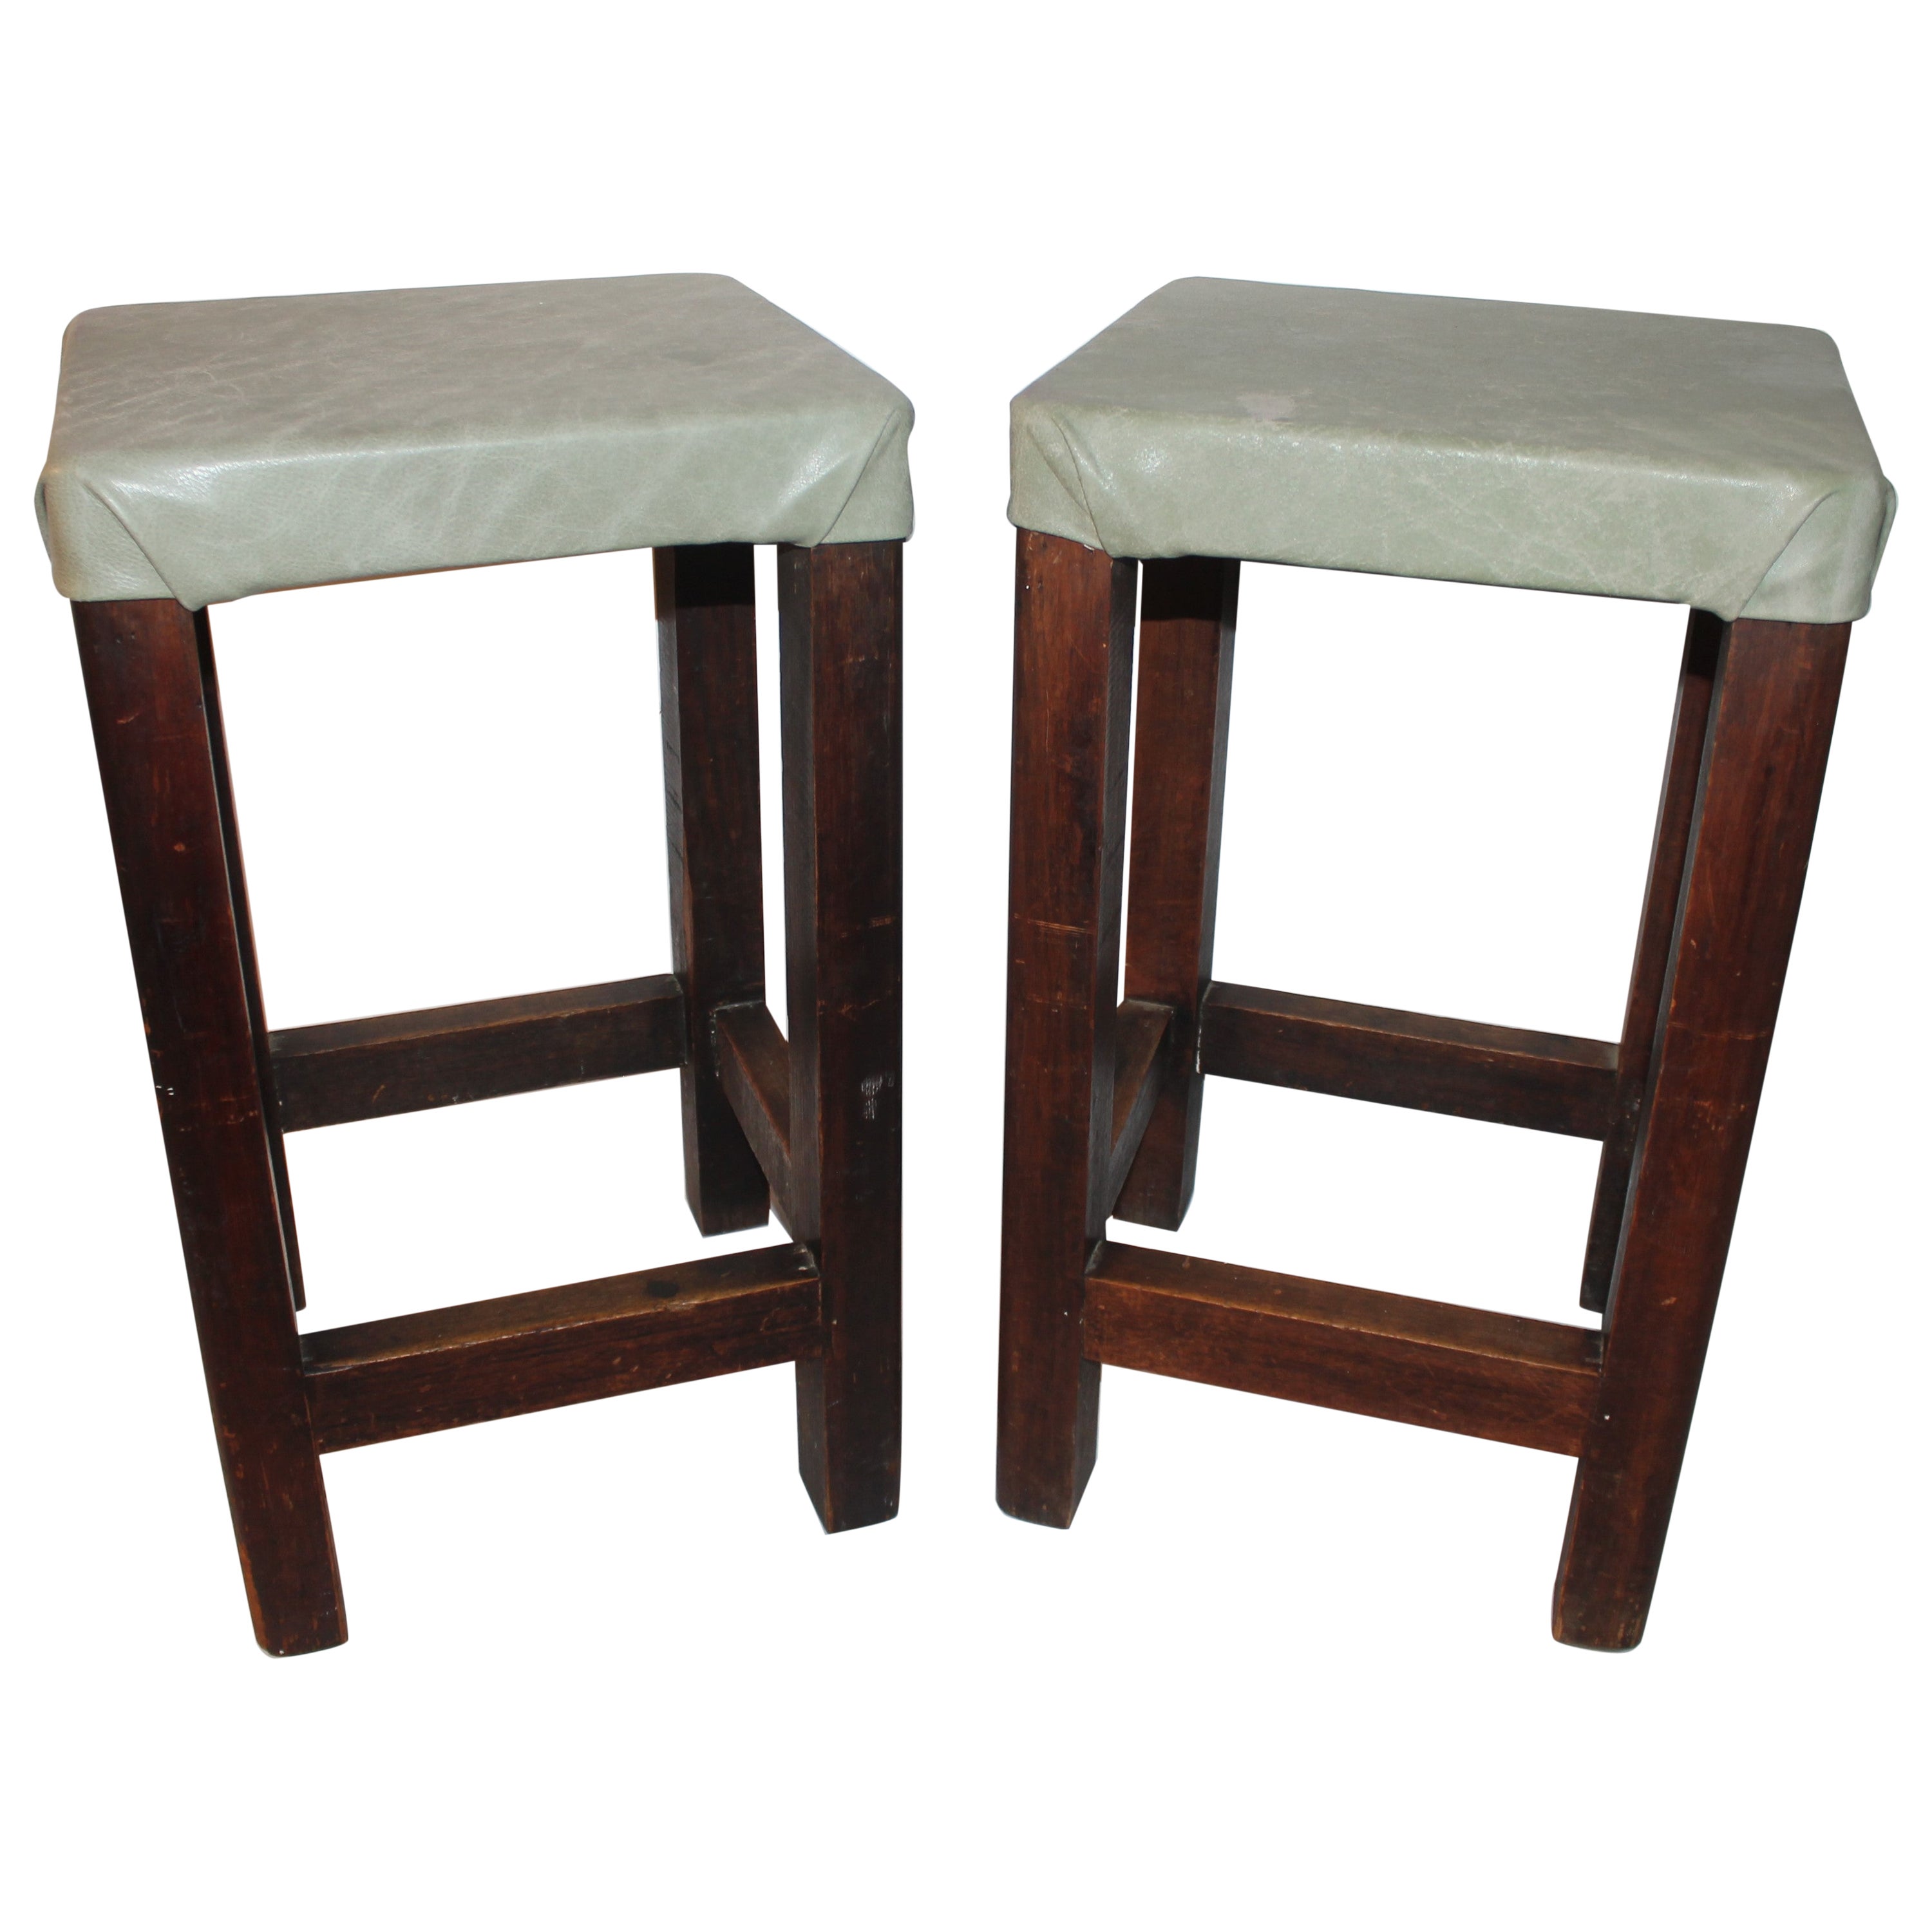 Pair of Barstools with Sage Green Leather Seats For Sale